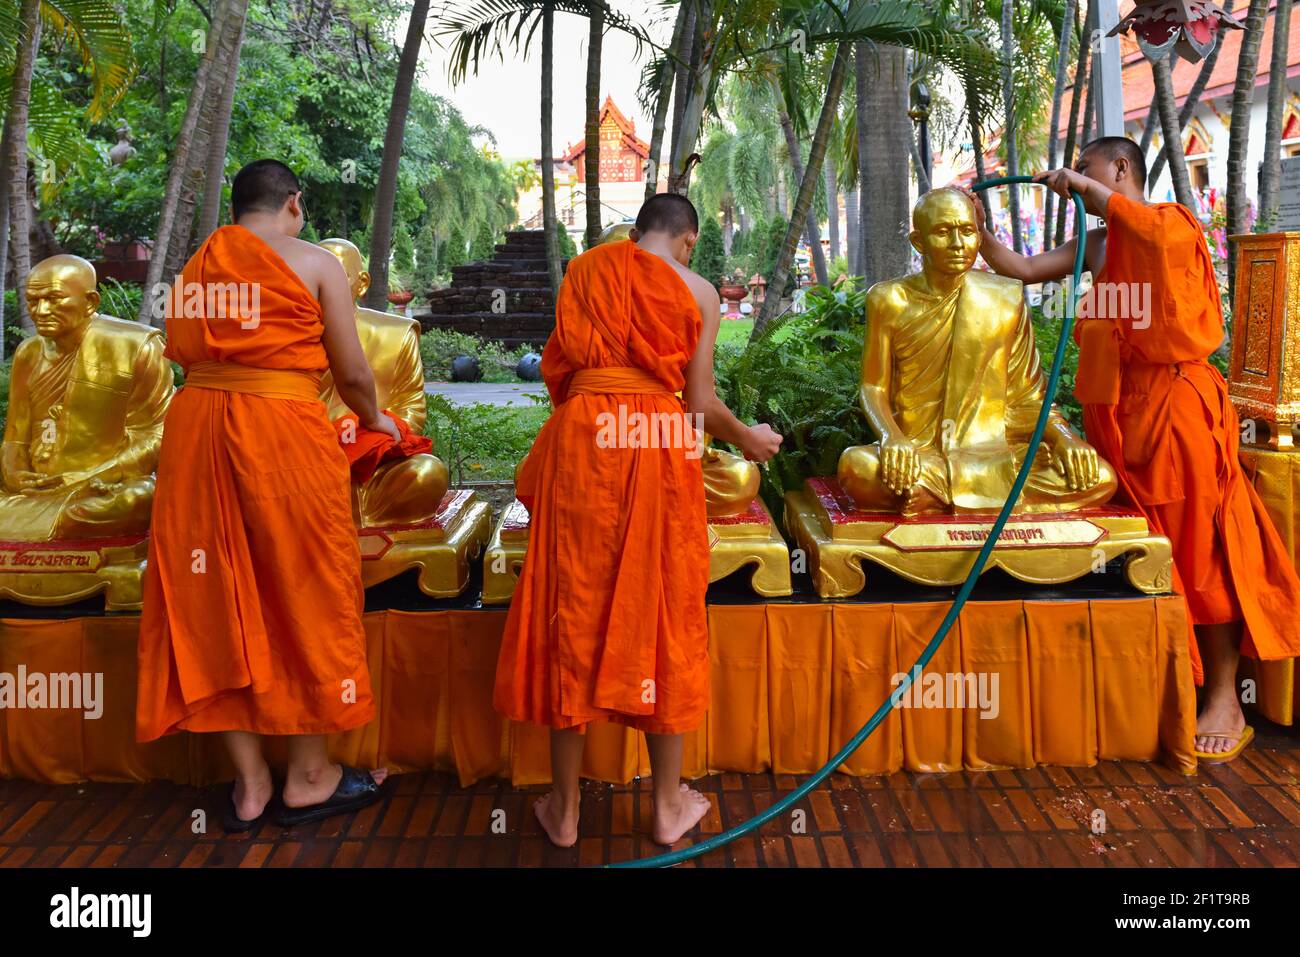 Buddhist monks washing religious statues at the Wat Phra Singh Buddhist Temple, Chiang Mai, Thailand Stock Photo